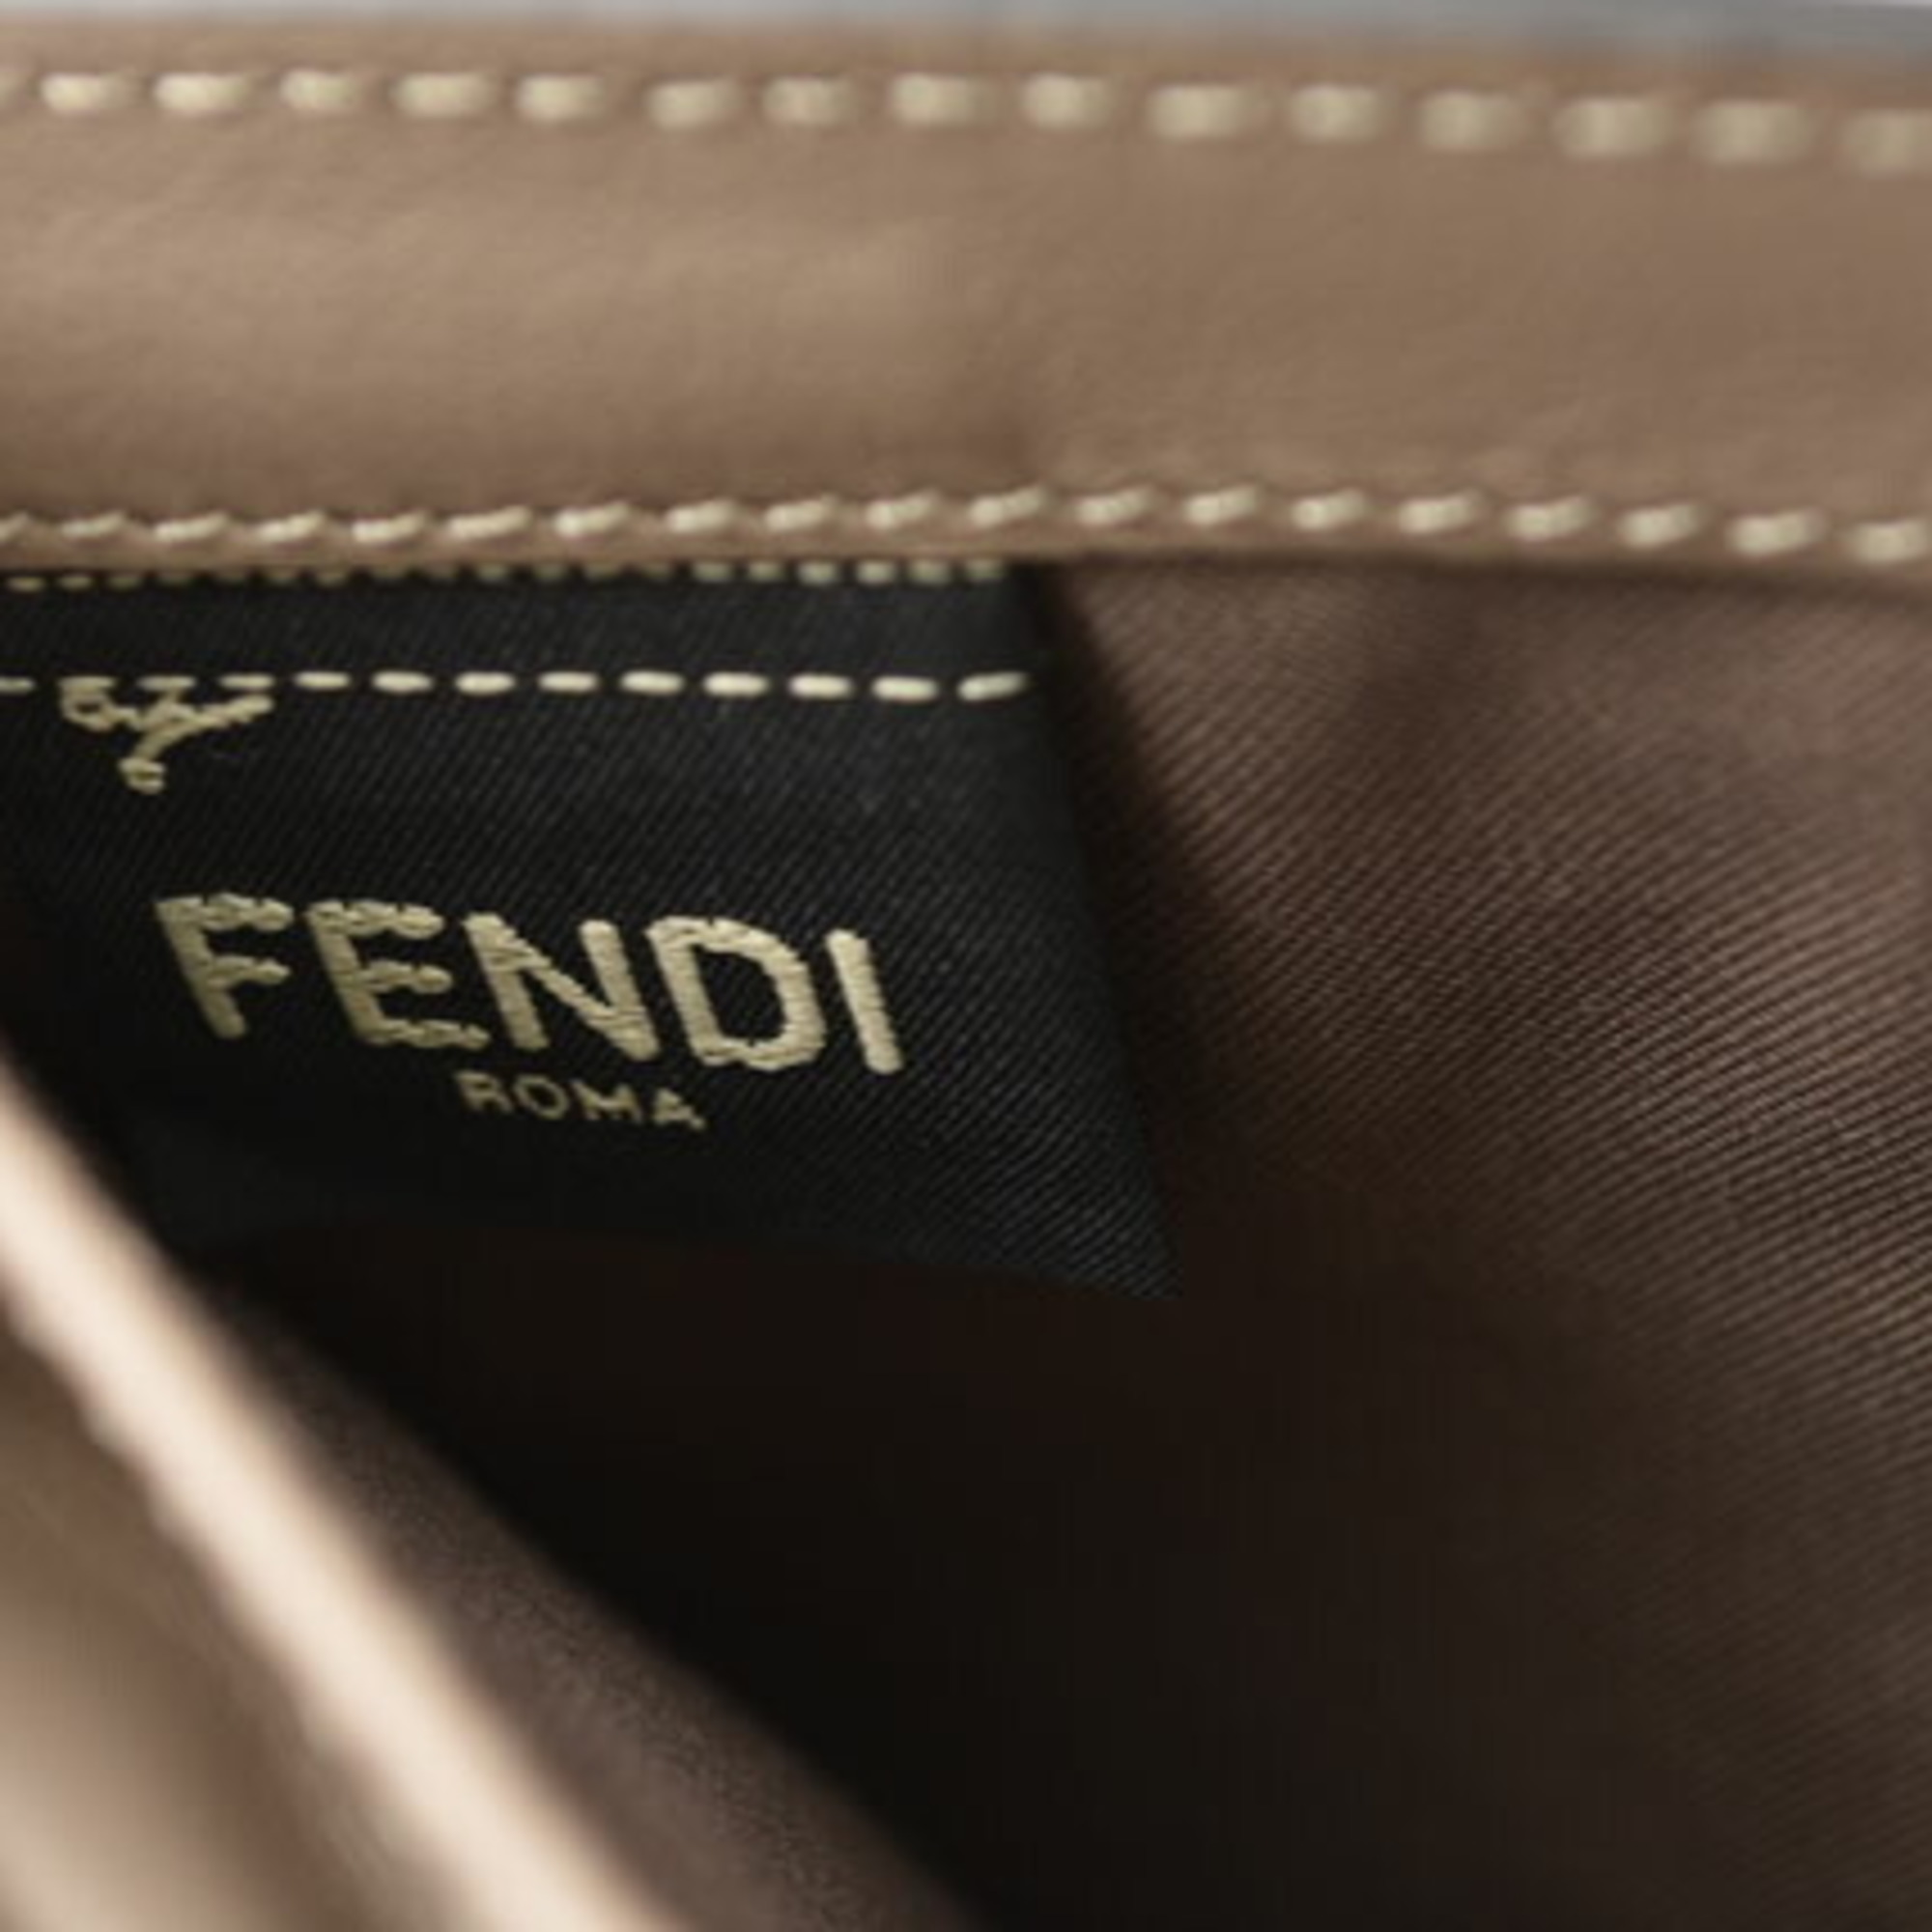 FENDI wallet fold BY THE WAY calf leather ROSE 8M0387